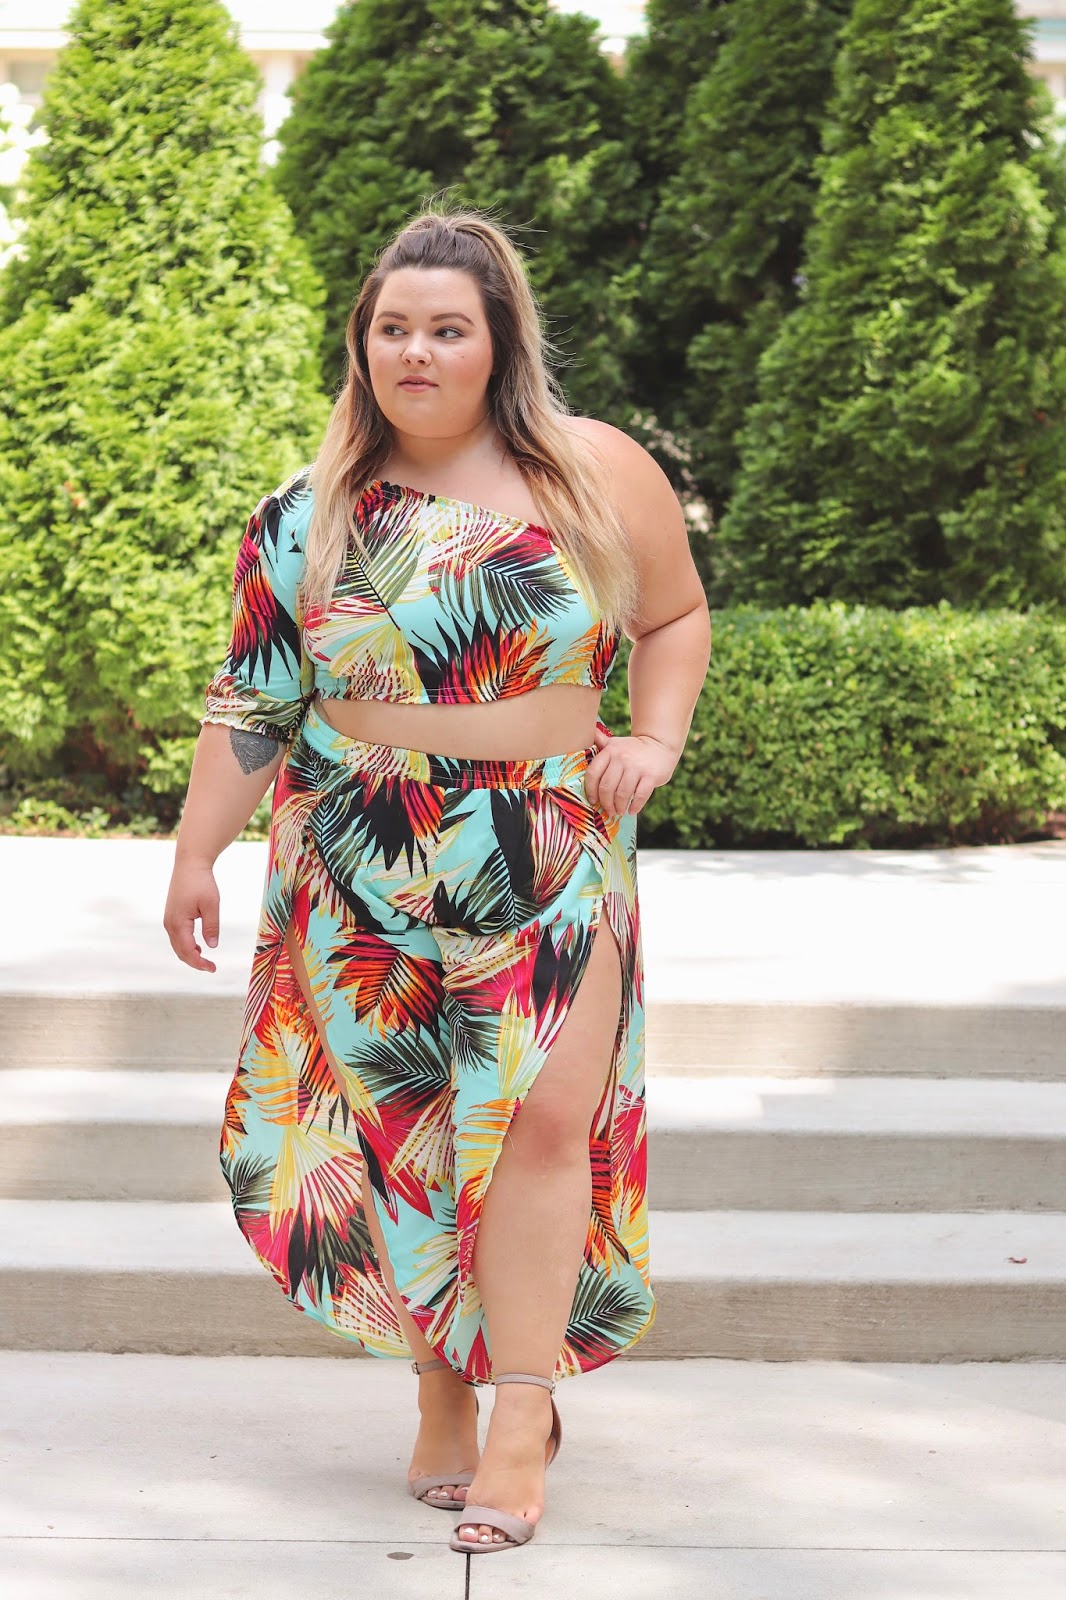 natalie in the city, chicago plus size fashion blogger, chicago fashion blogger, plus size fashion, affordable plus size clothes, fashion nova, fashion nova curve, blogger review, brittany sunrise tropical set, tropical getaway clothes, tropical floral print, curves and confidence, sexy plus size clothing